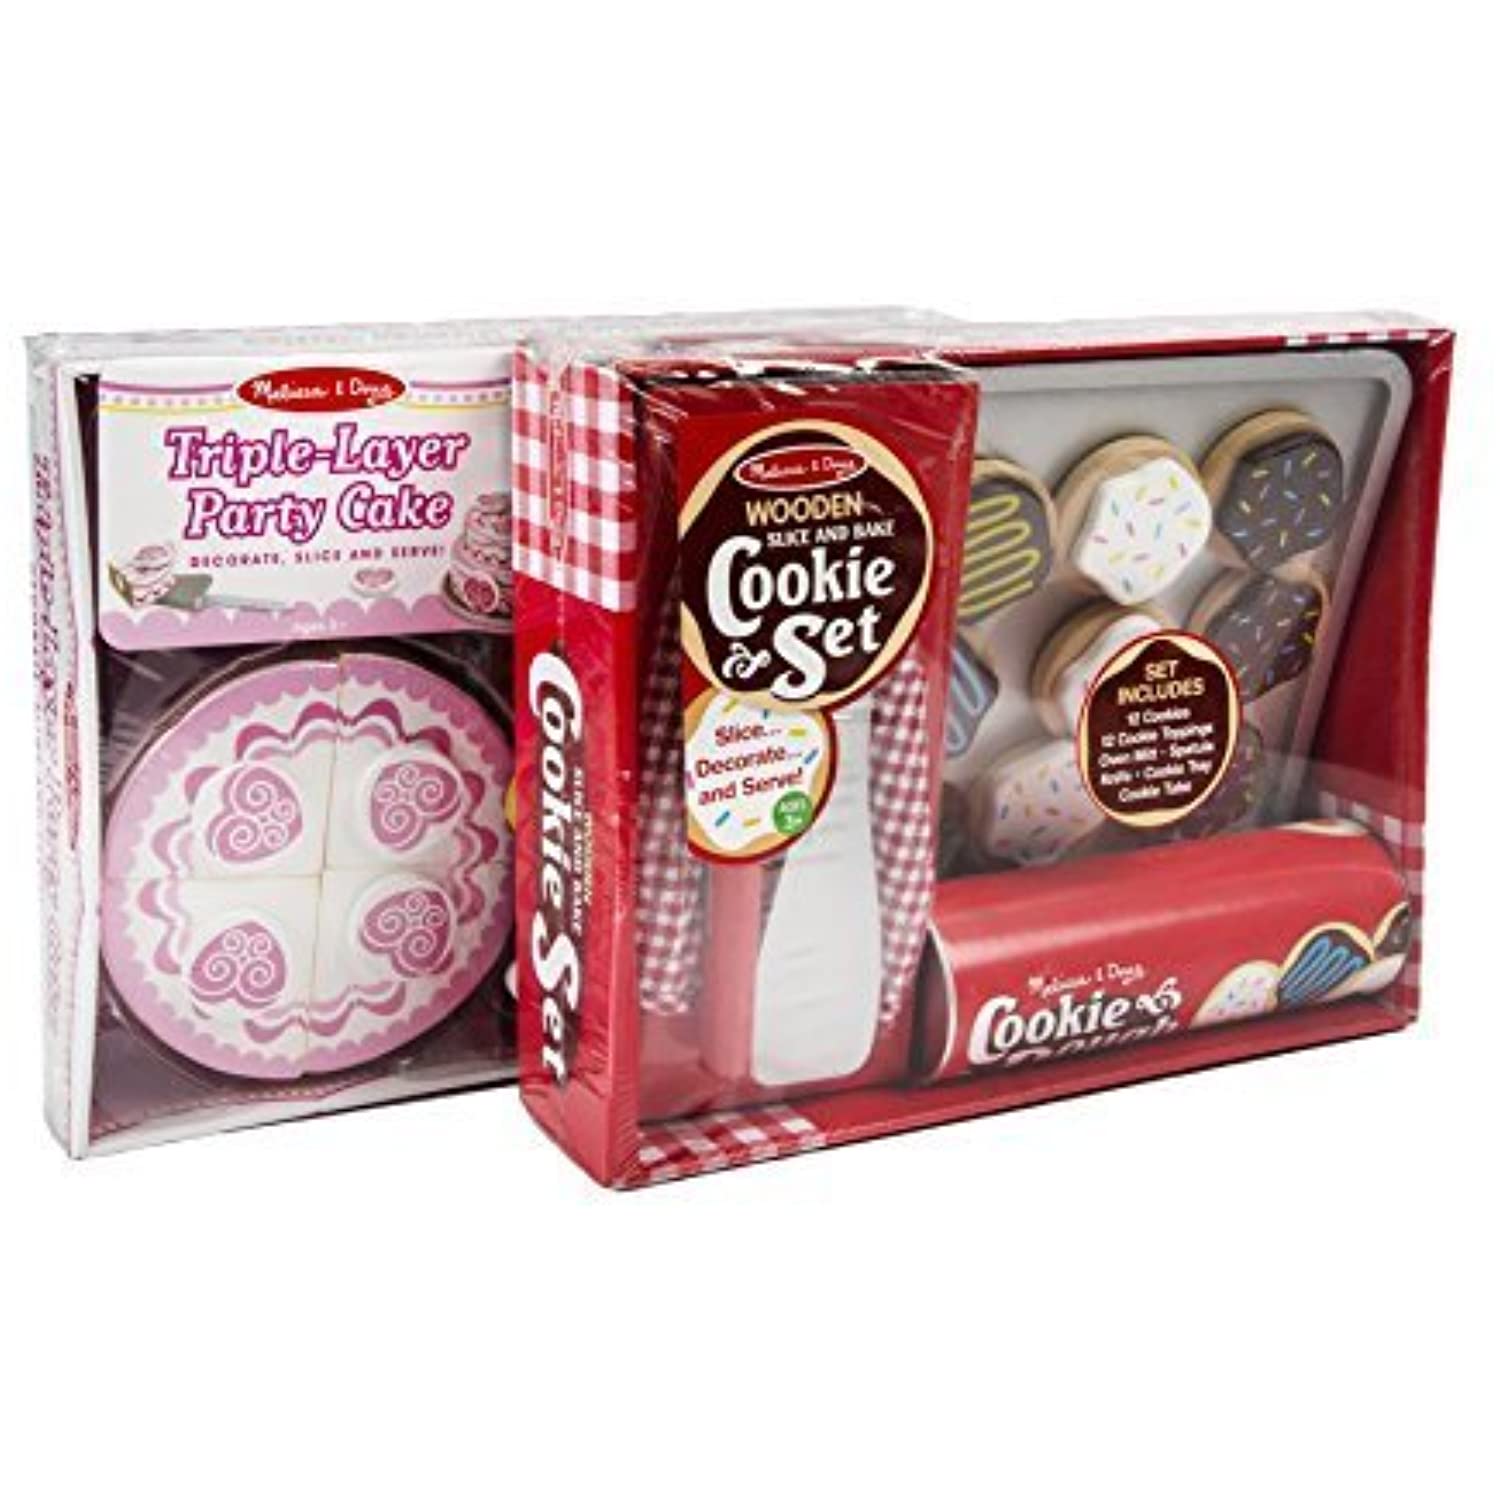 Melissa and Doug Wooden Playsets Bundle - Triple-Layer Party Cake with Bake and Decorate Cupcake Set - Ages 3 and Up - Imaginative Fun